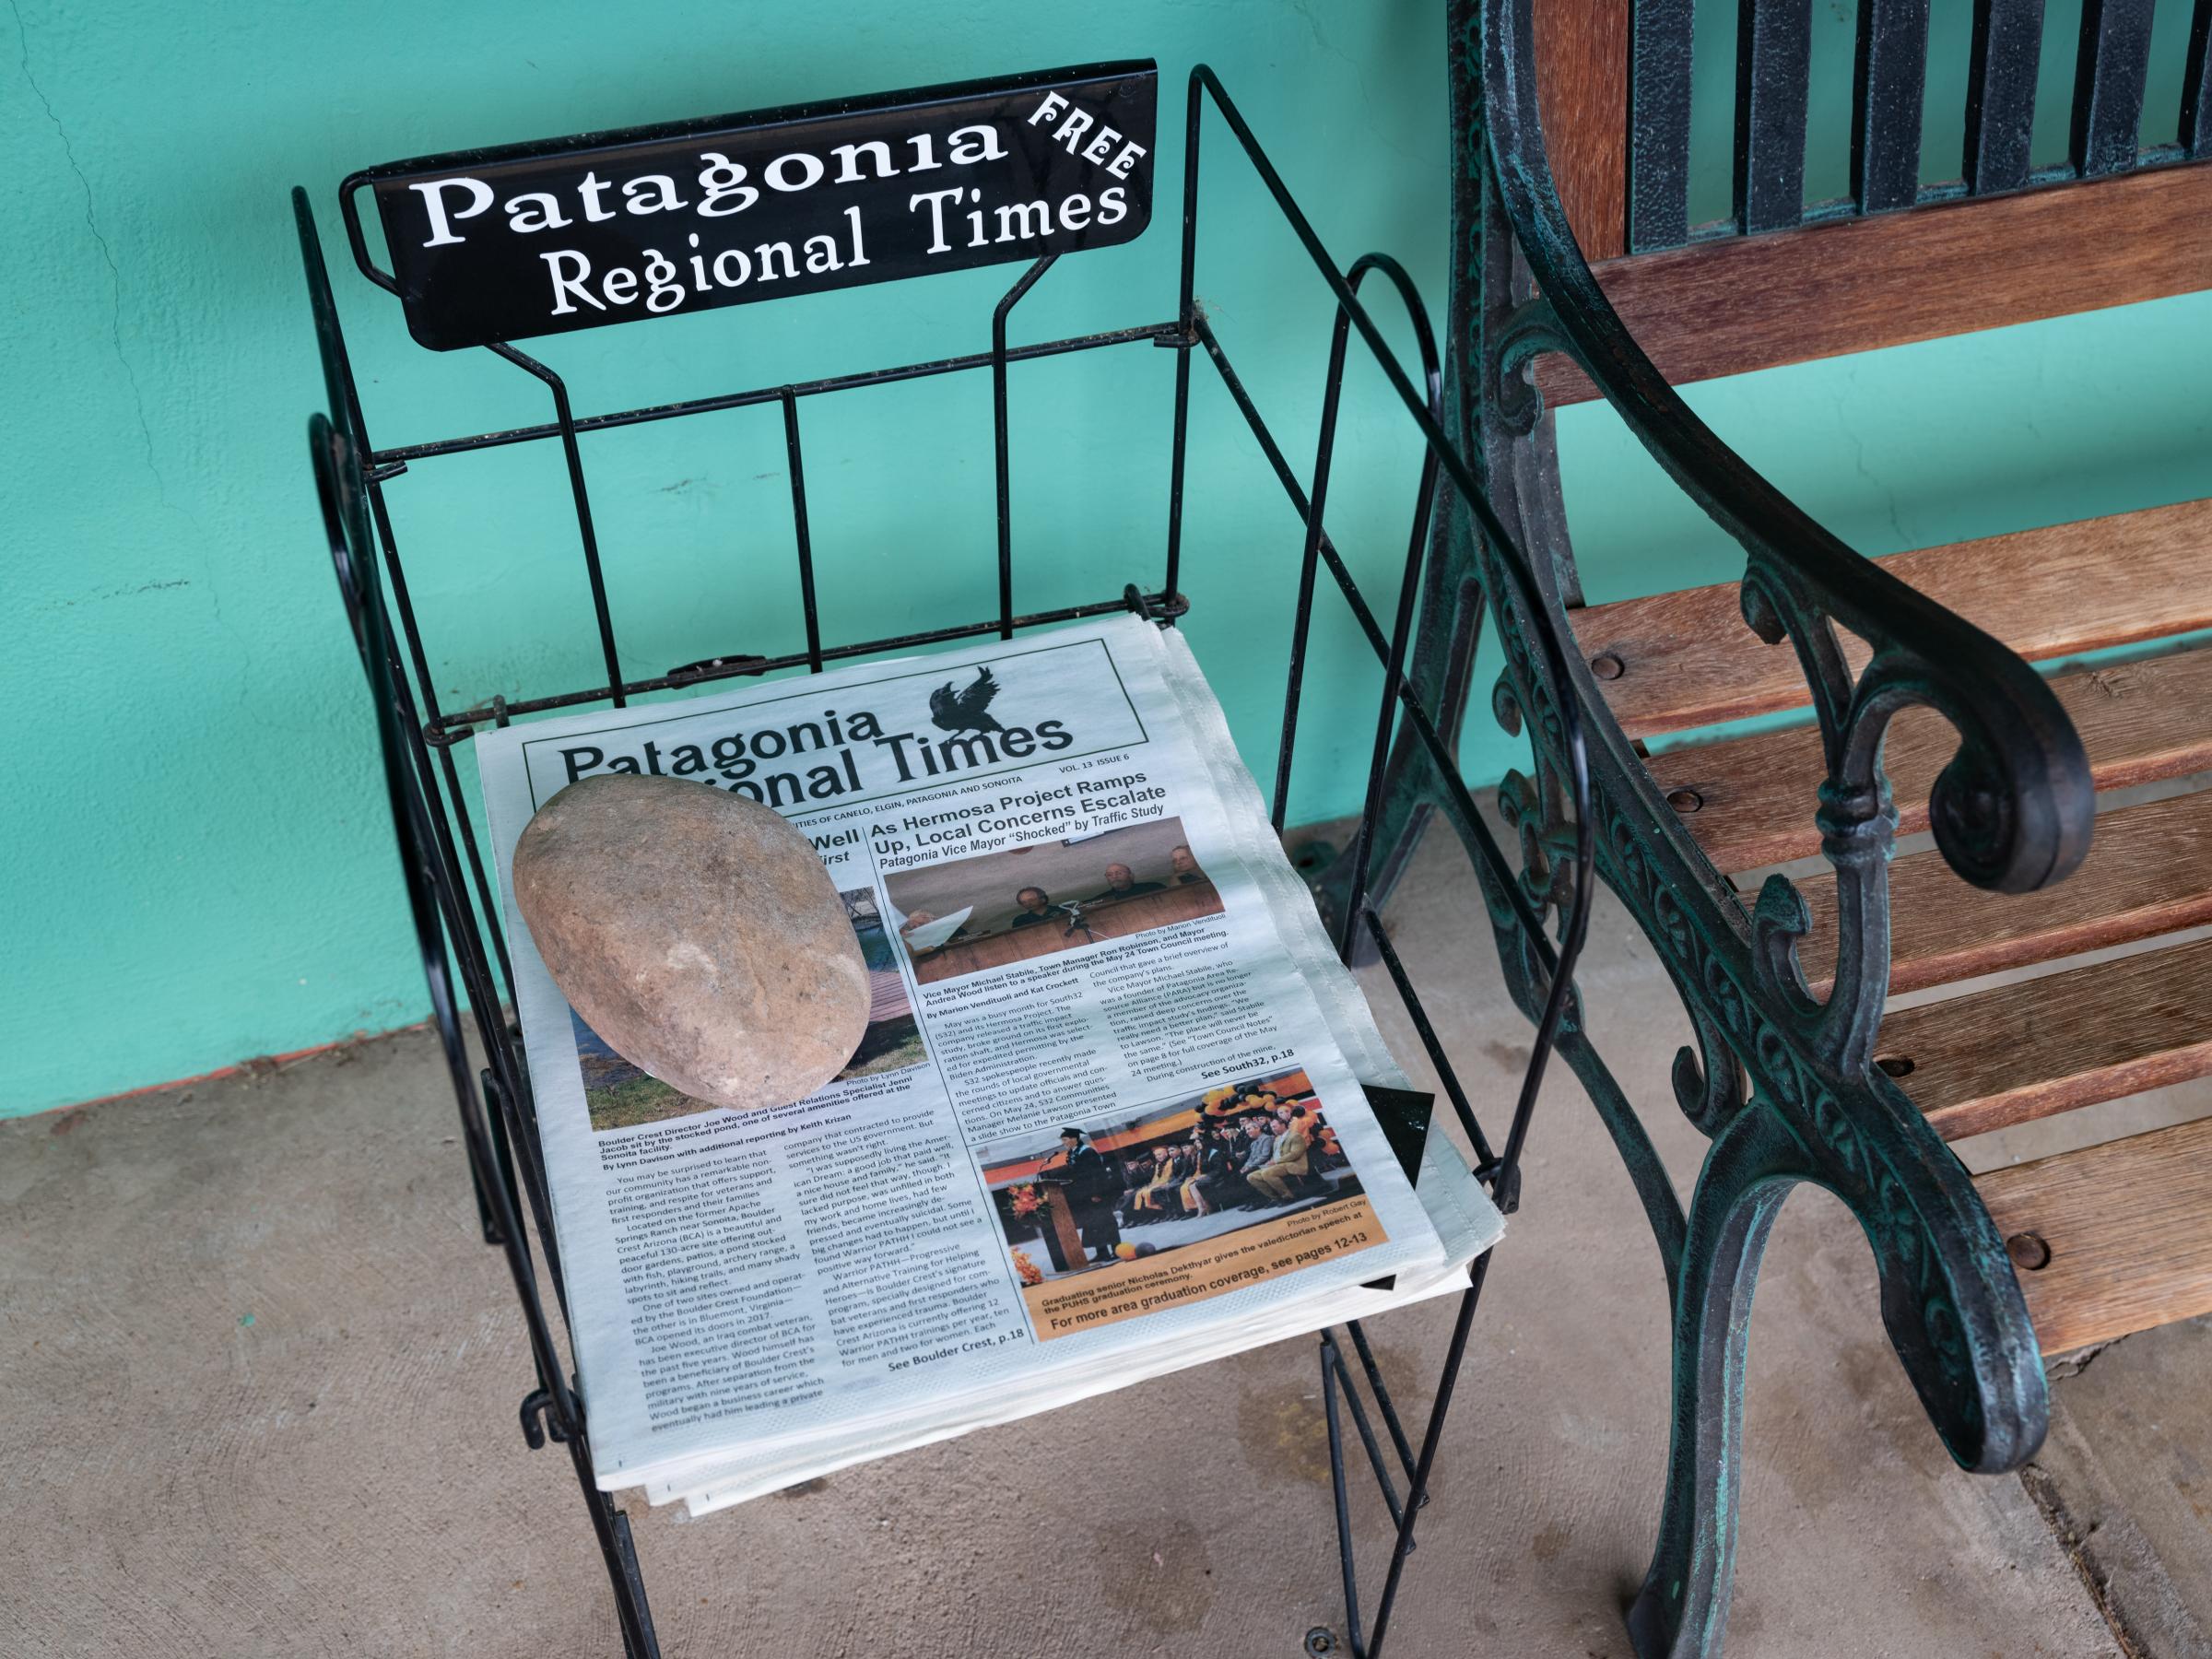 Saving the Patagonias - The Intercept - The front page of the Patagonia Regional Times includes a...